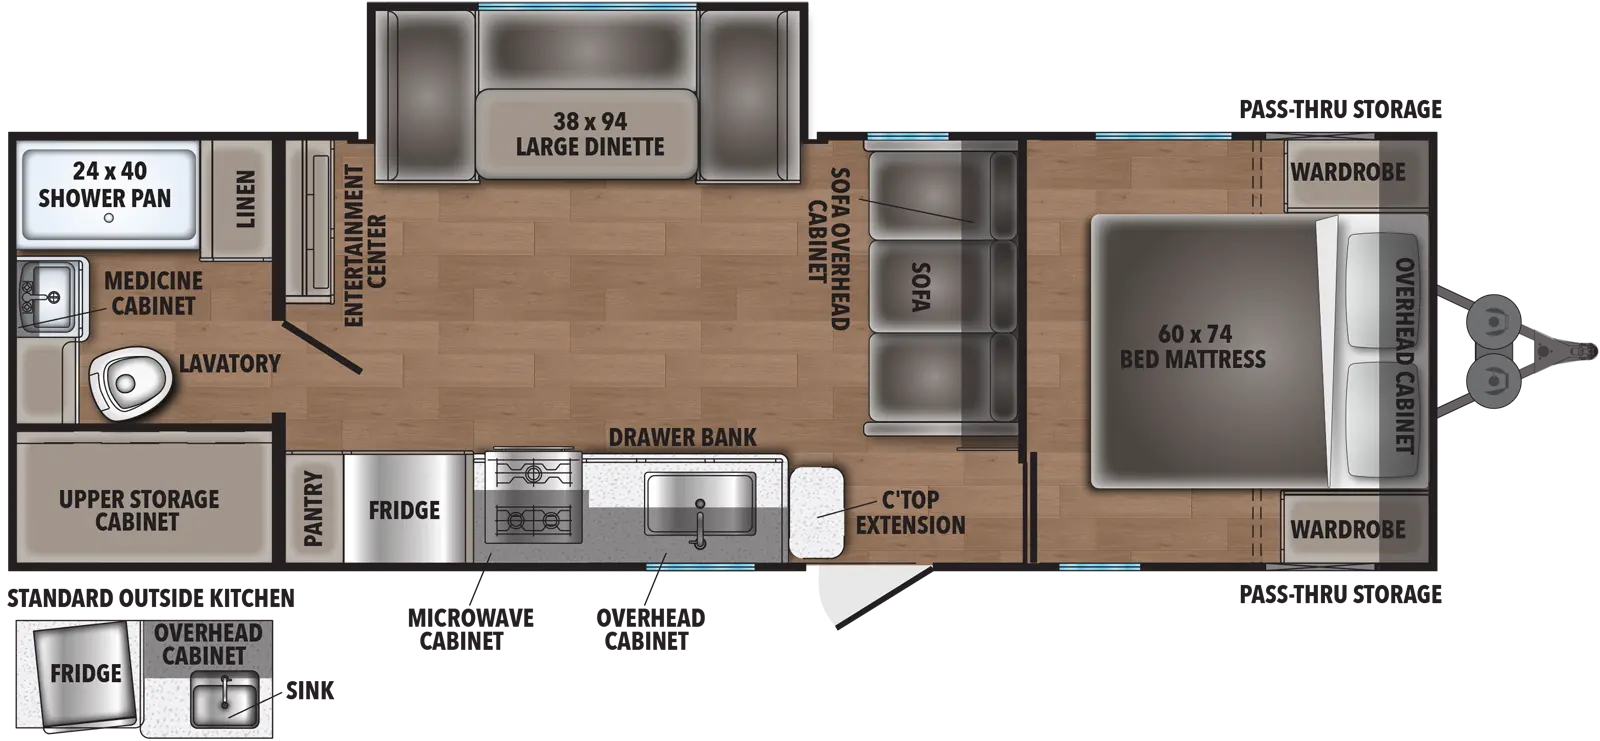 The 25RB has one slide out on the off-door side and one entry door on the door side. Interior layout from front to back: bedroom with side-facing queen bed; sofa with overhead cabinet; kitchen living dining area with off door side slide out containing large dinette; kitchen with single basin sink, cook top stove, microwave cabinet, refrigerator, and overhead cabinet; entertainment center; and bathroom.